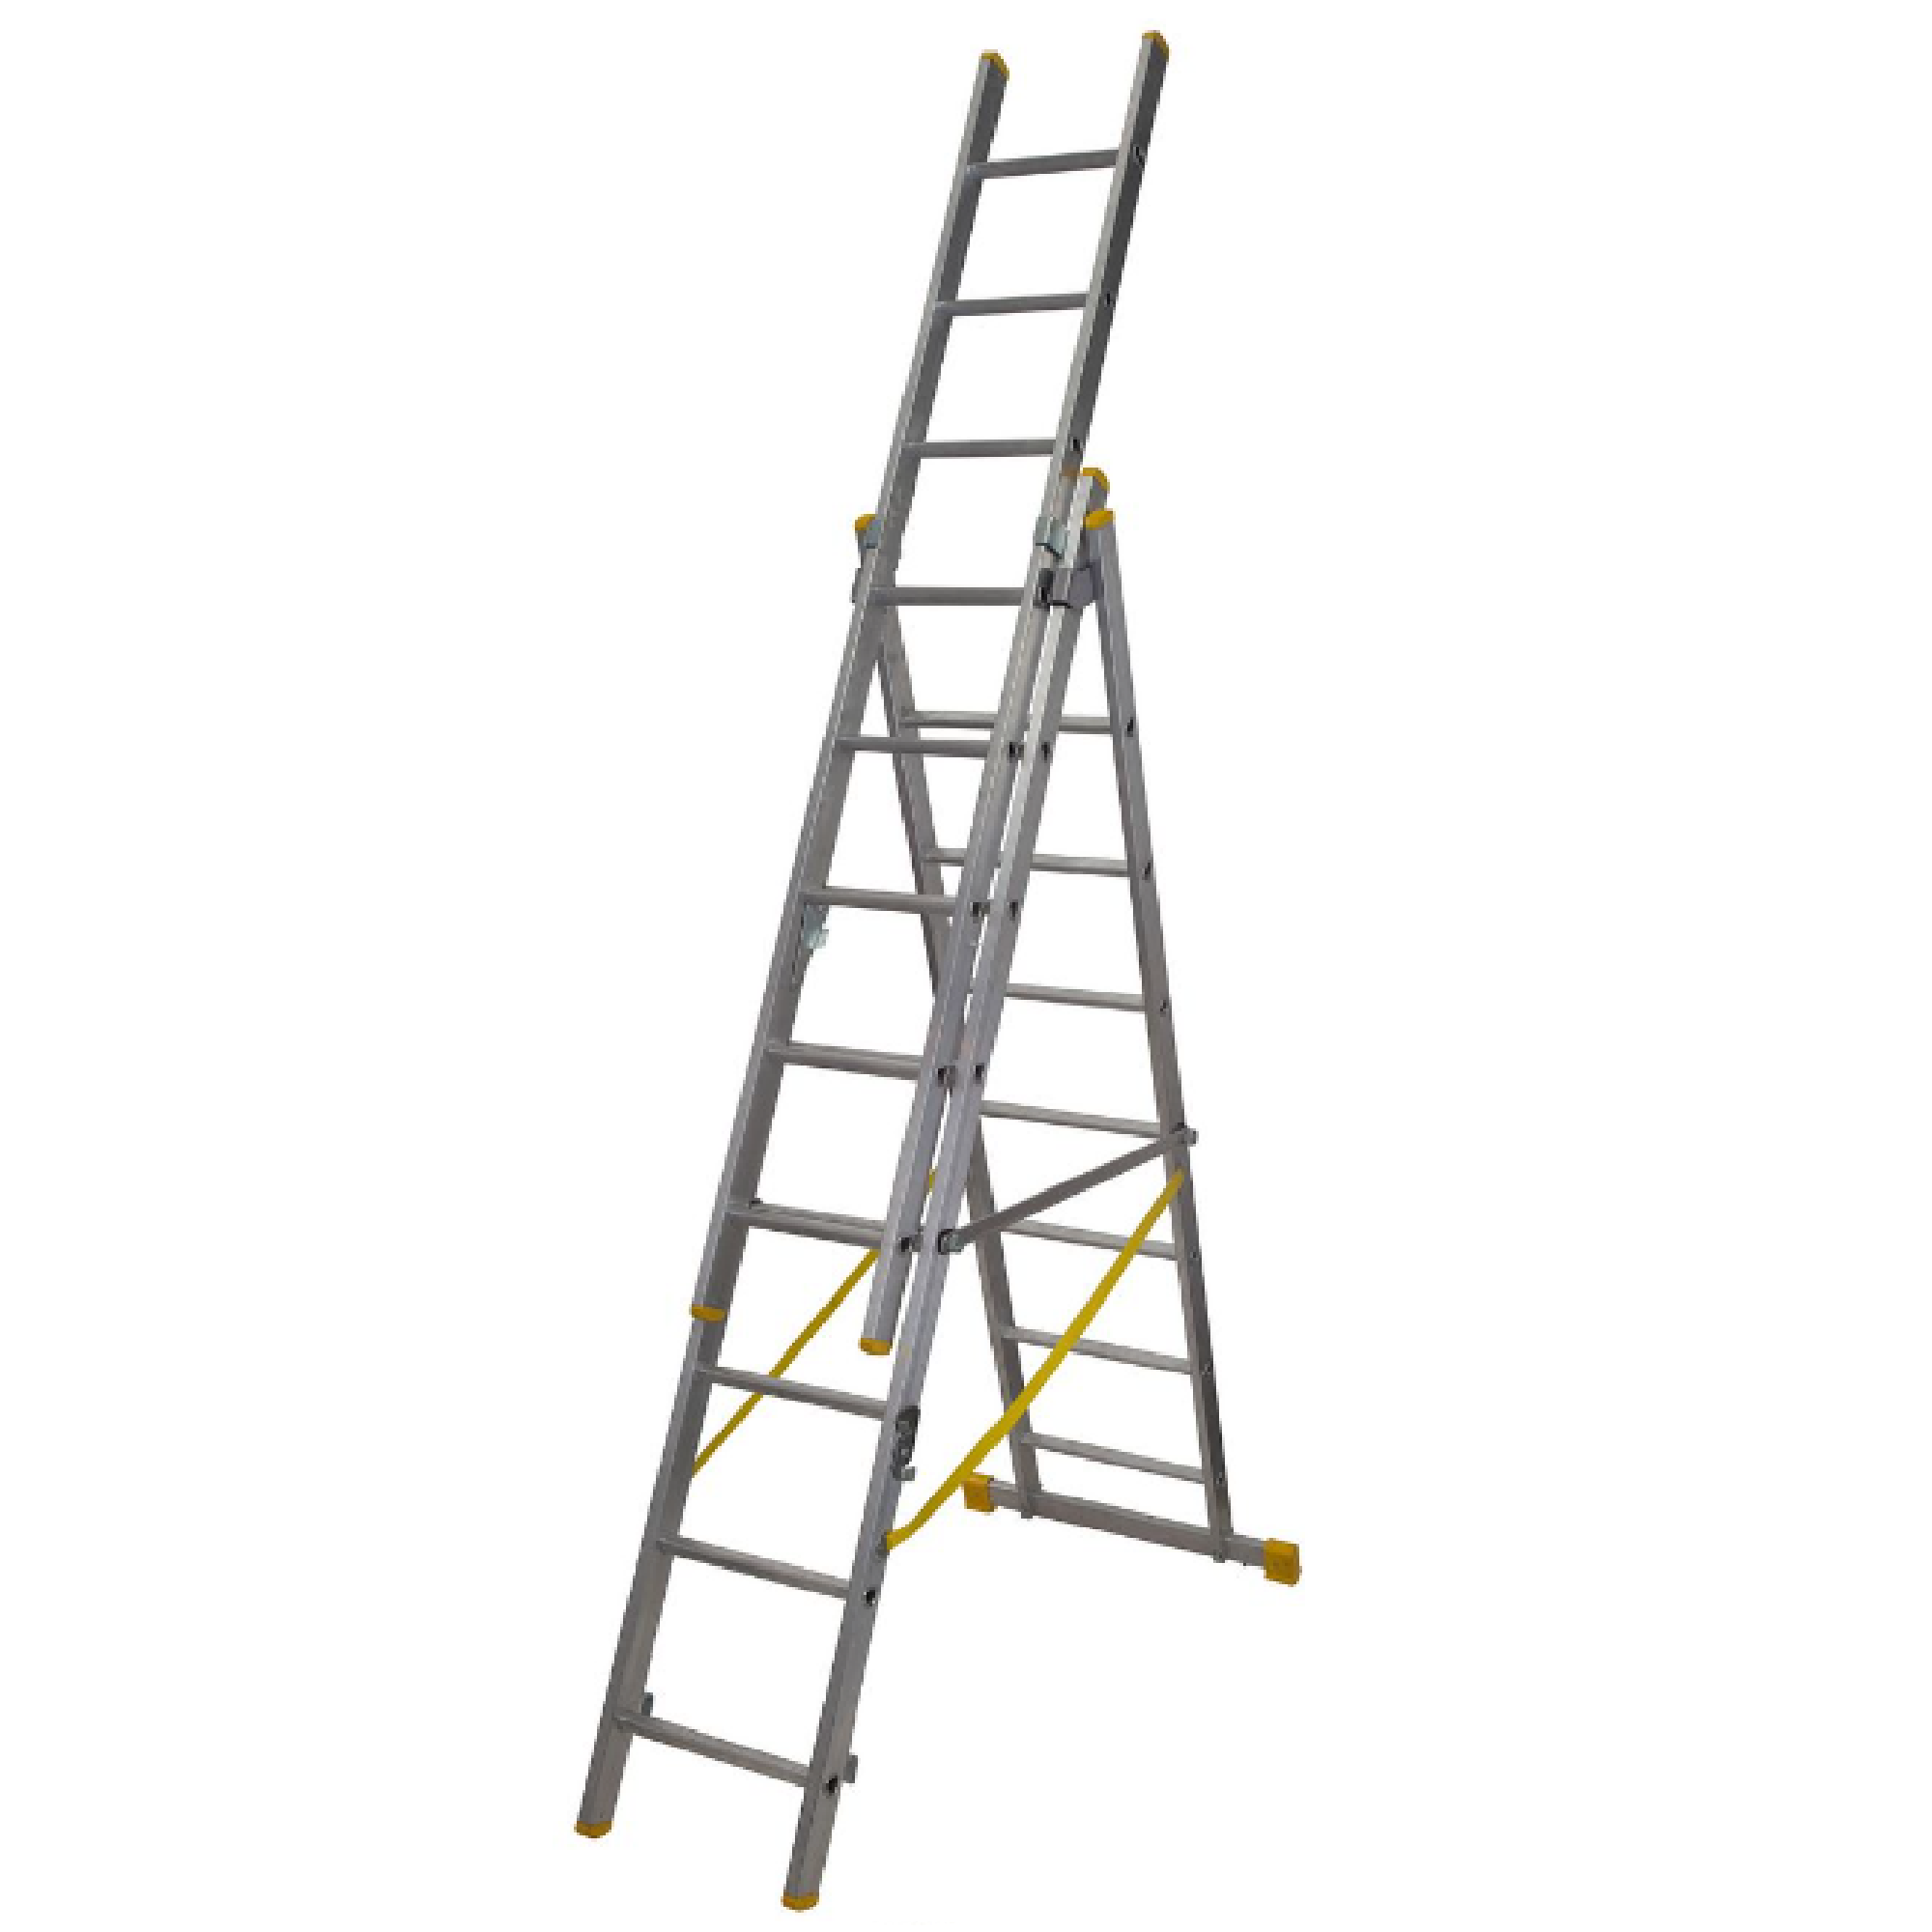 YOUNGMAN Combi Ladder 100, 4-IN-1 Combination Ladder 2.4M (2.5M)